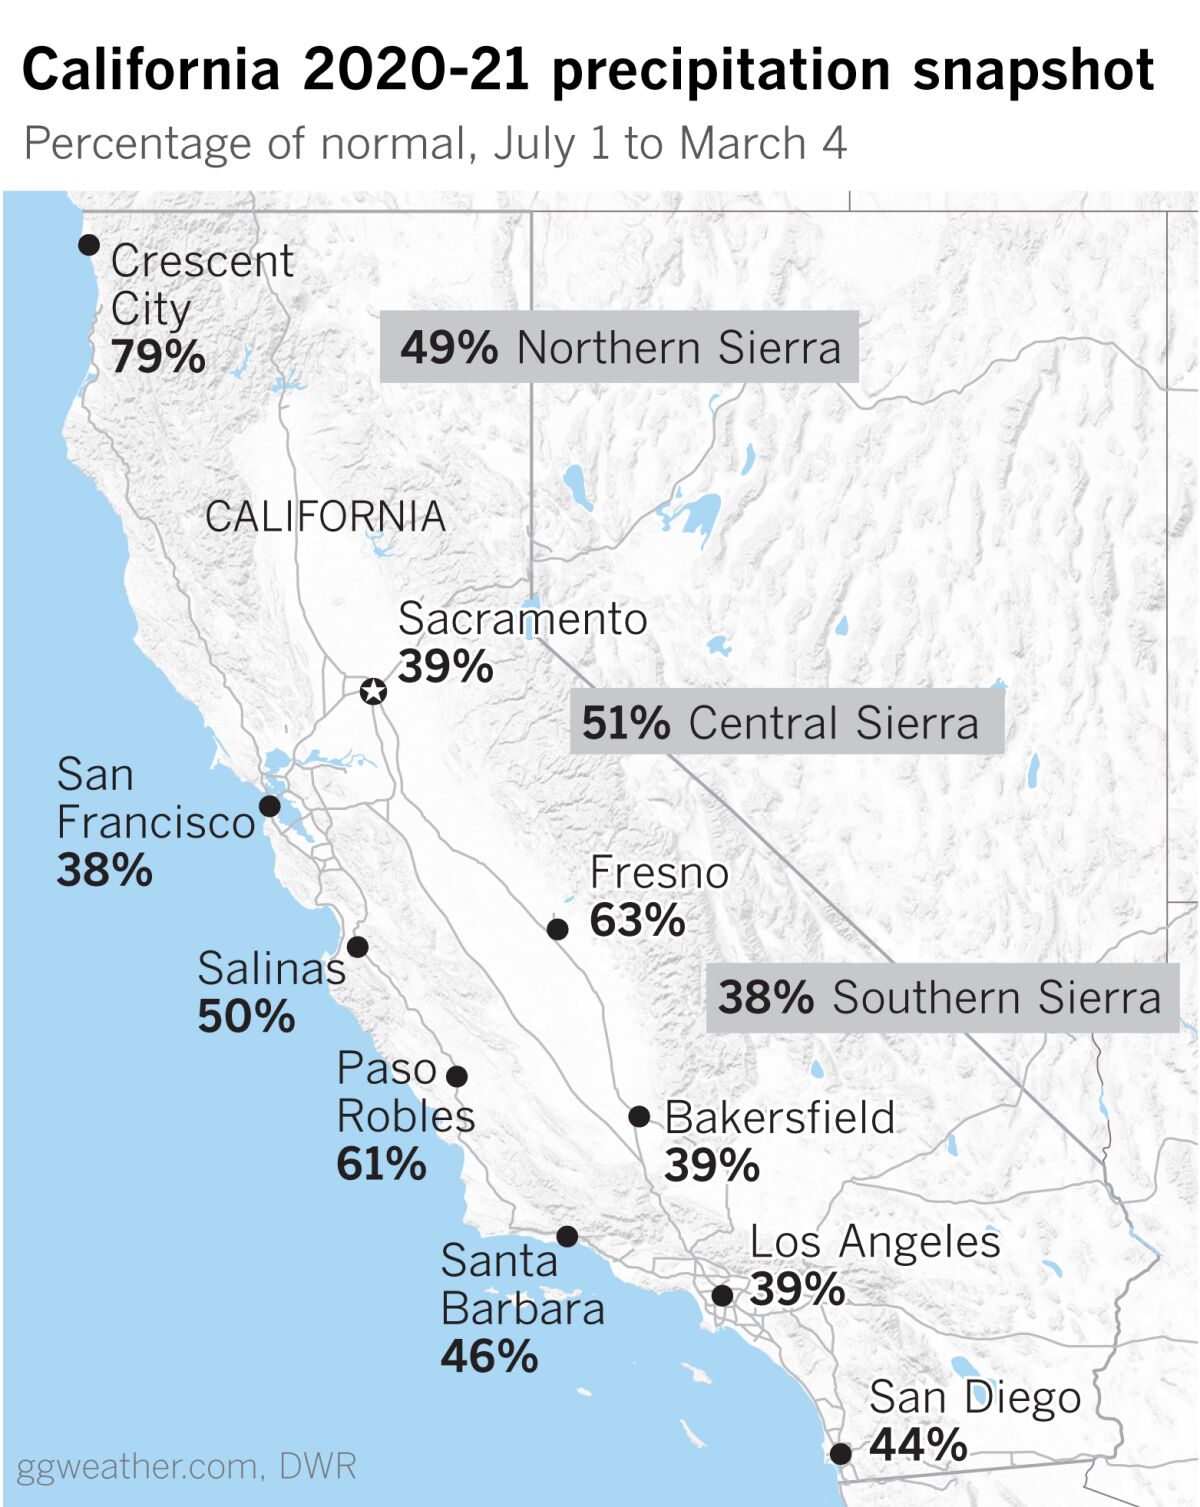 A map of California with percentage of normal rainfall in various cities ranging from 38% to 79%